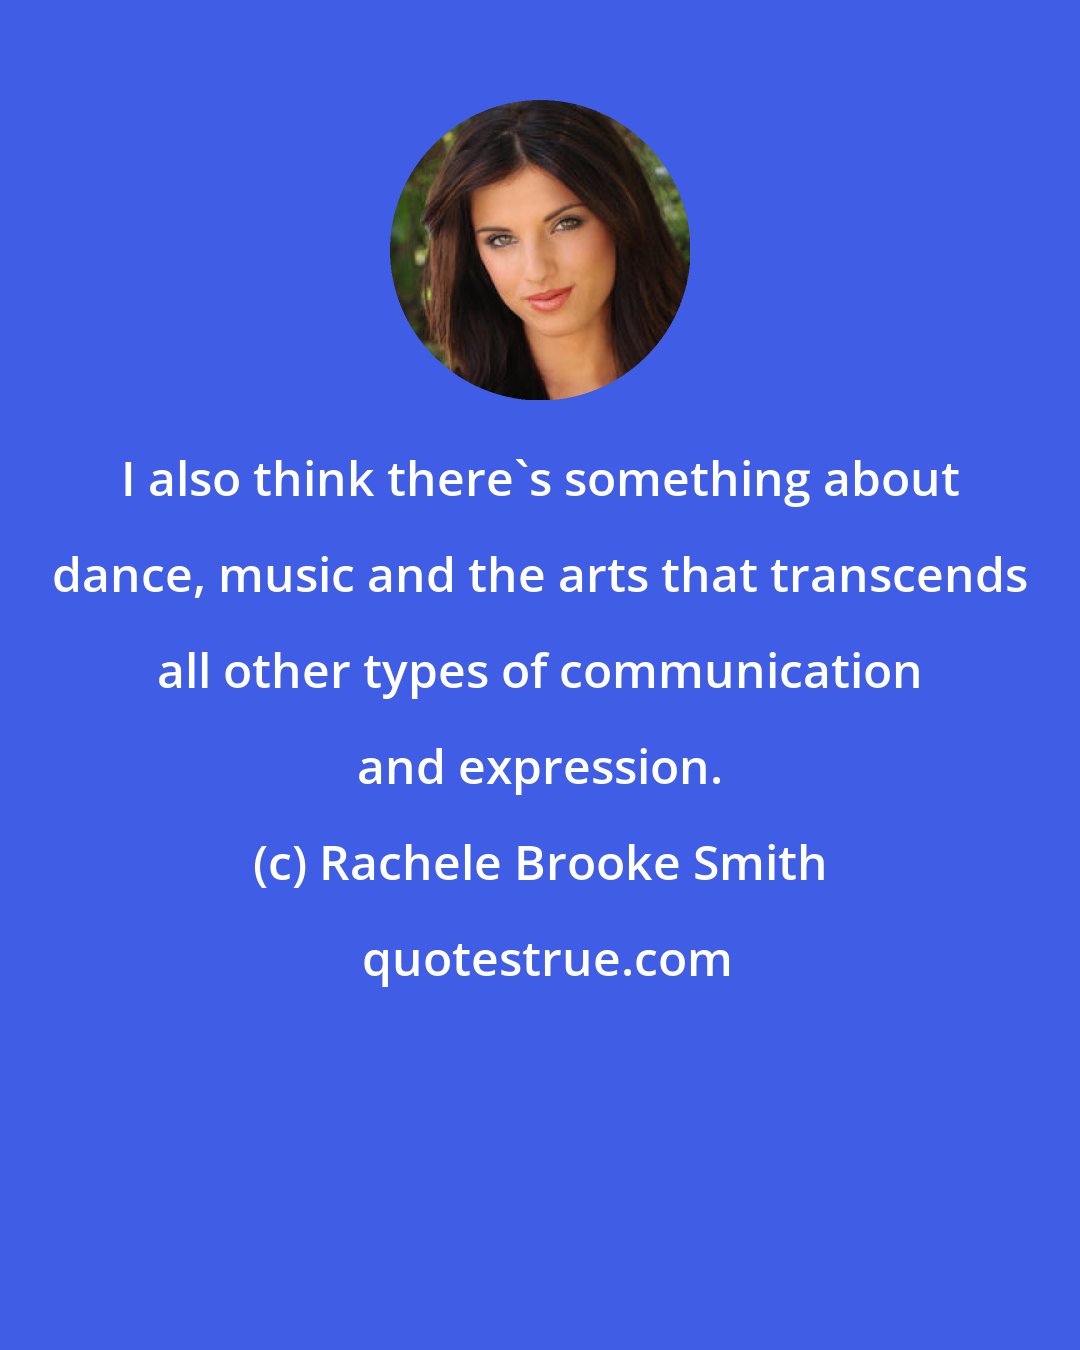 Rachele Brooke Smith: I also think there's something about dance, music and the arts that transcends all other types of communication and expression.